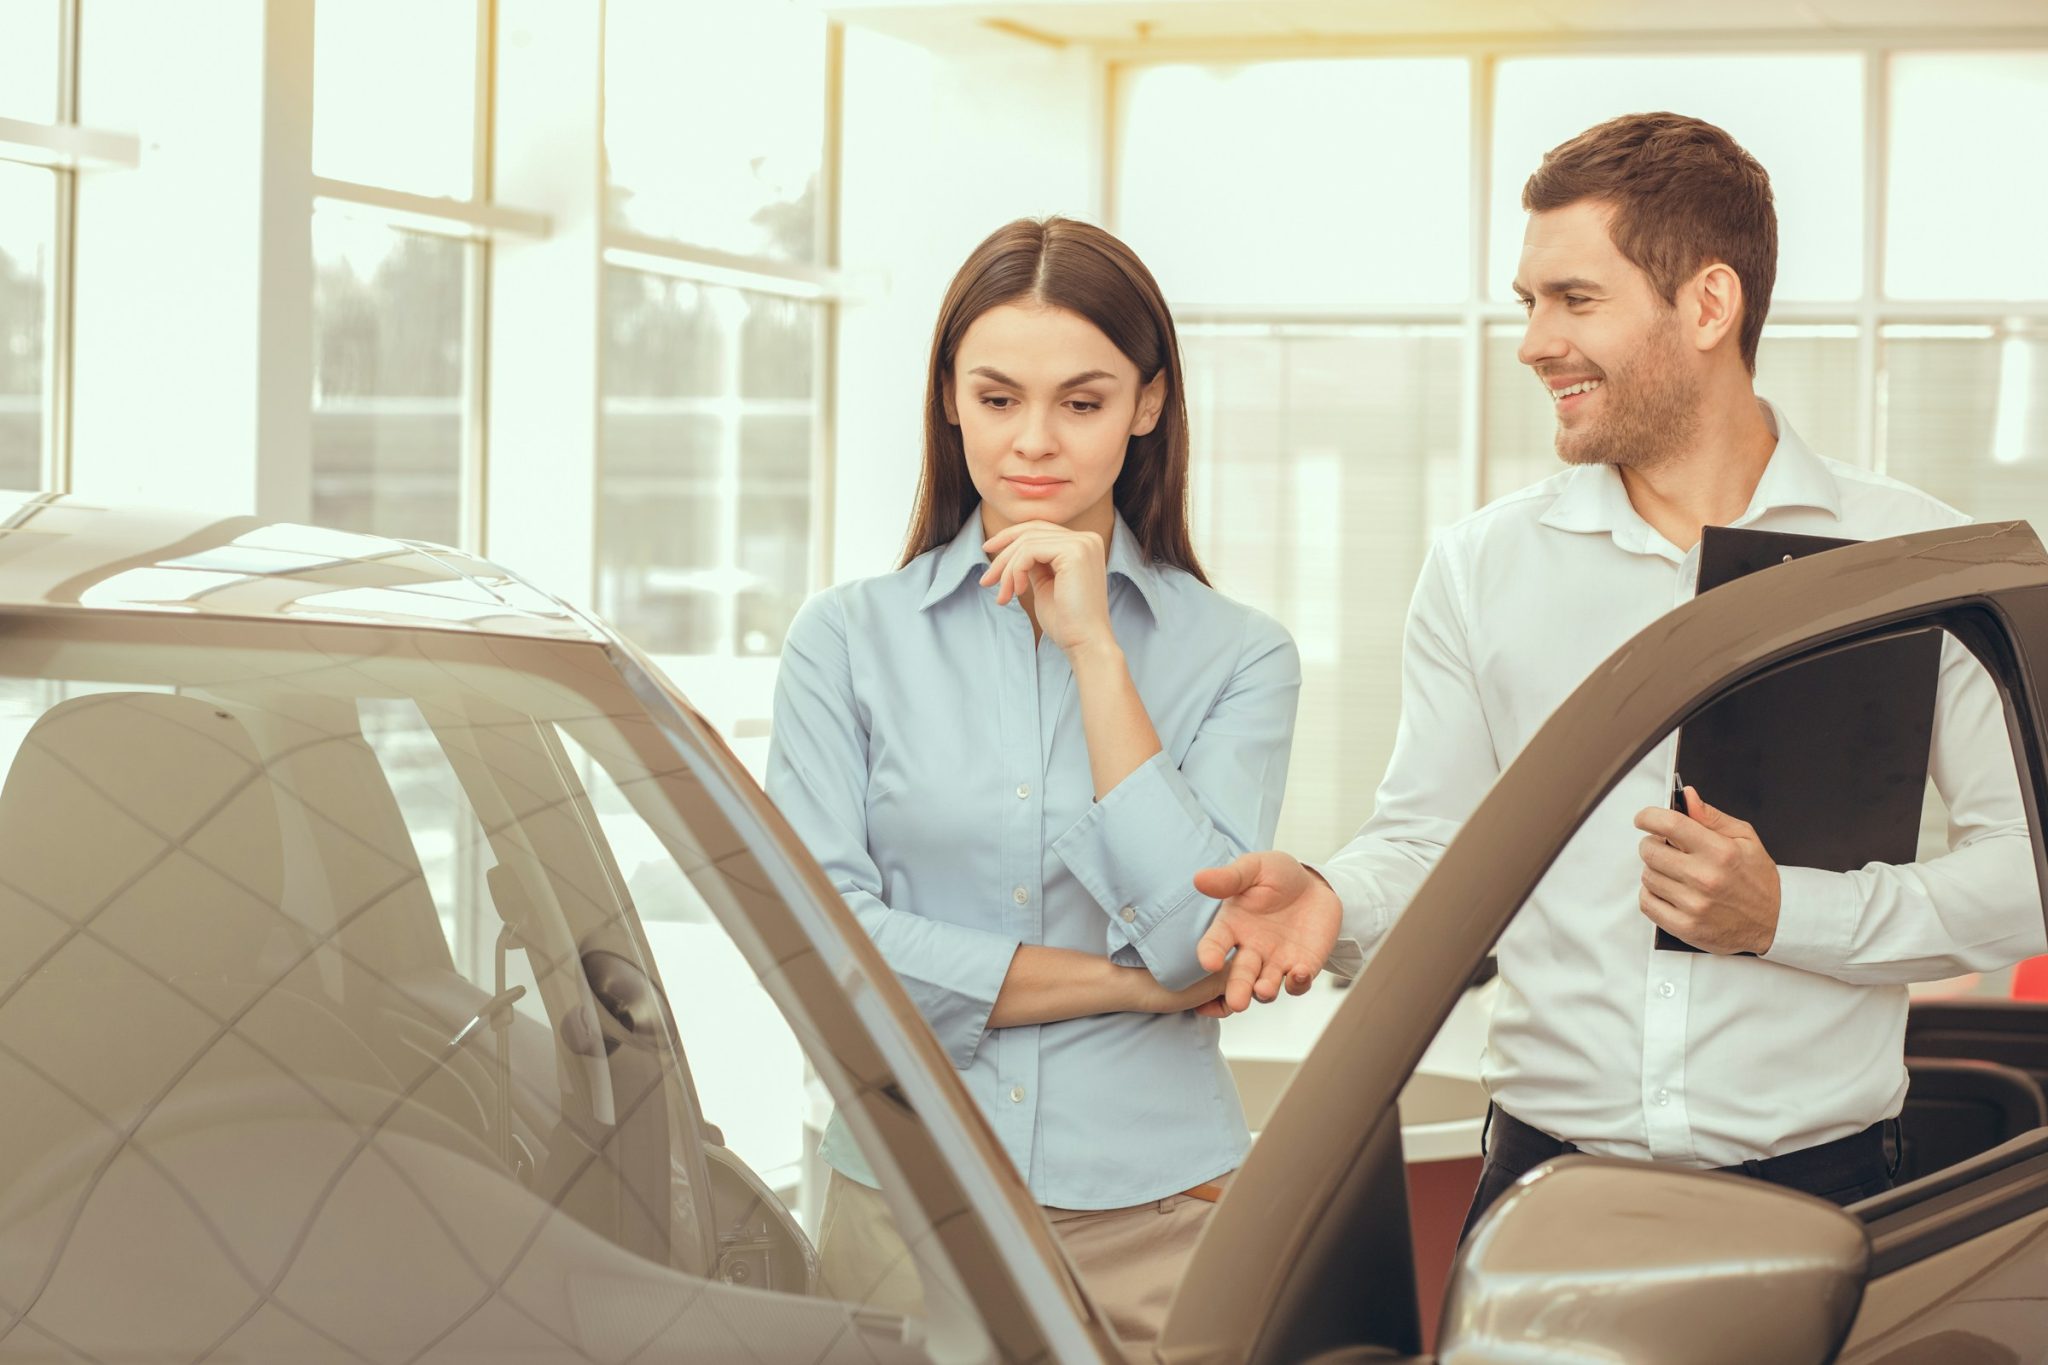 How technology revolutionizes the car selling process for everyone